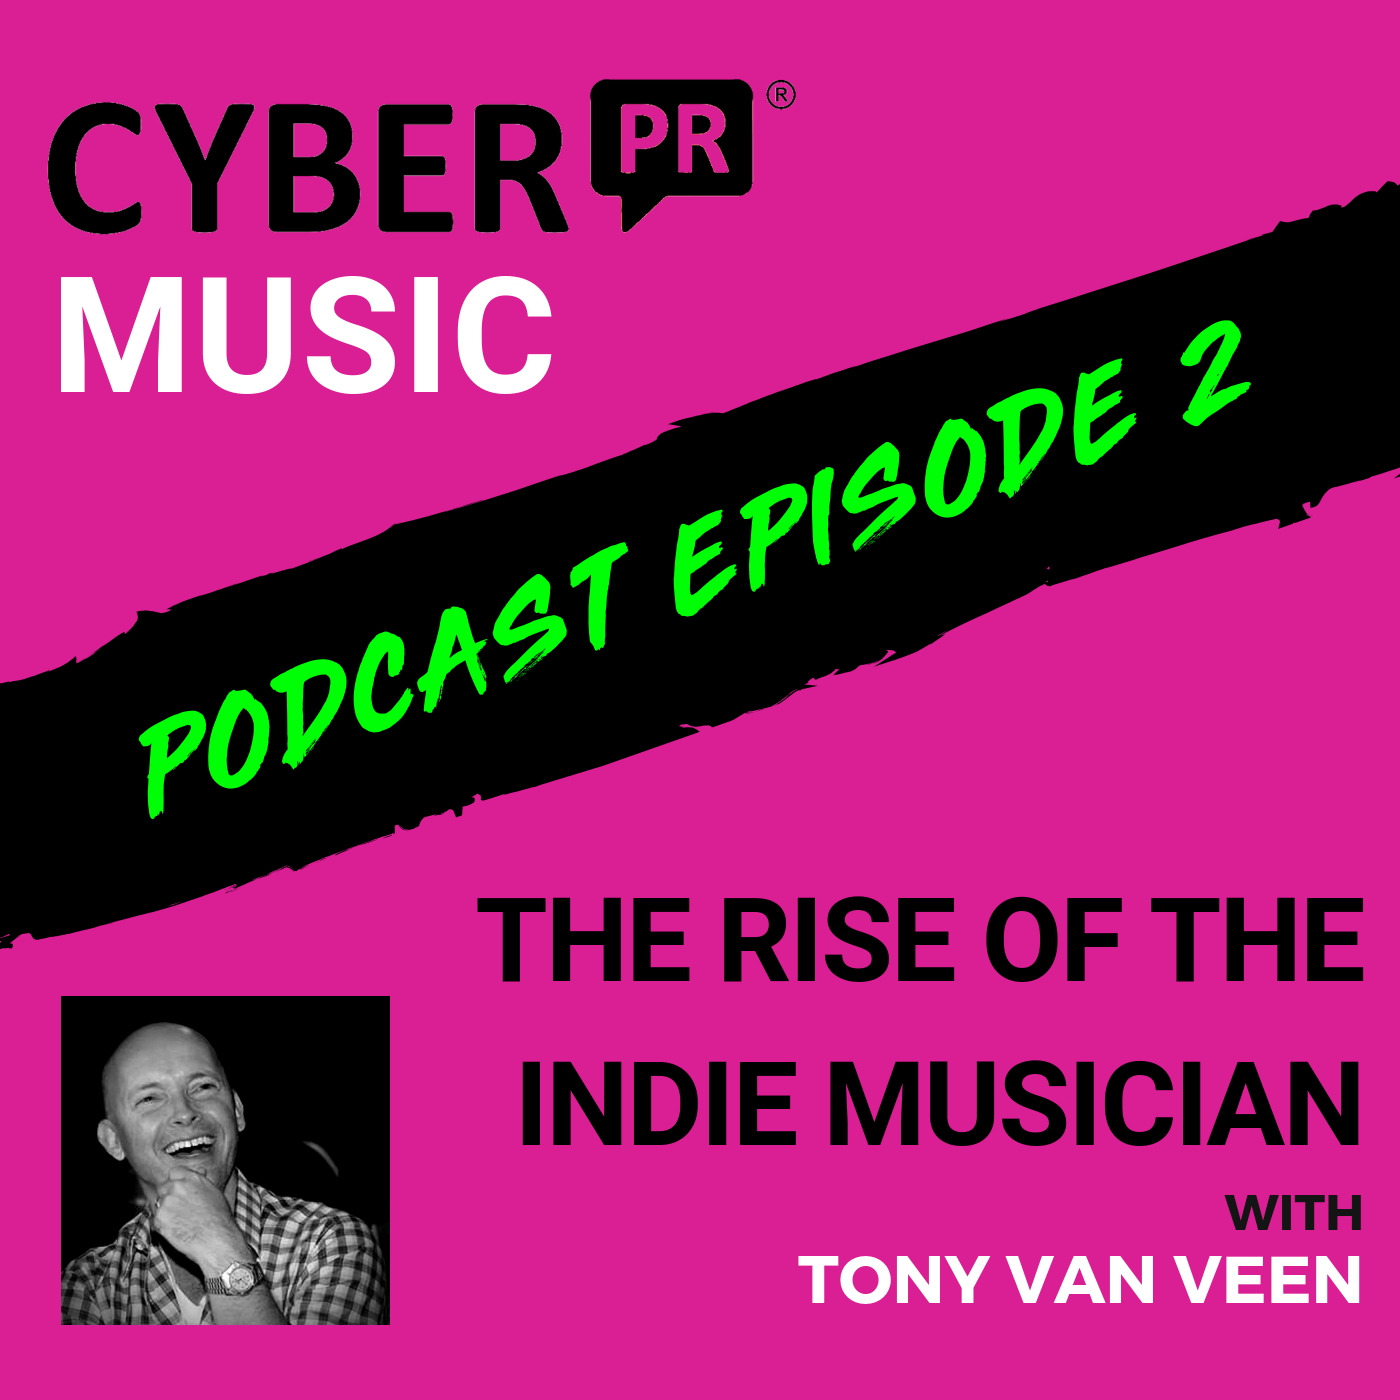 The Cyber PR Music Podcast EP 2: Tony van Veen & The Rise of The Indie Musician